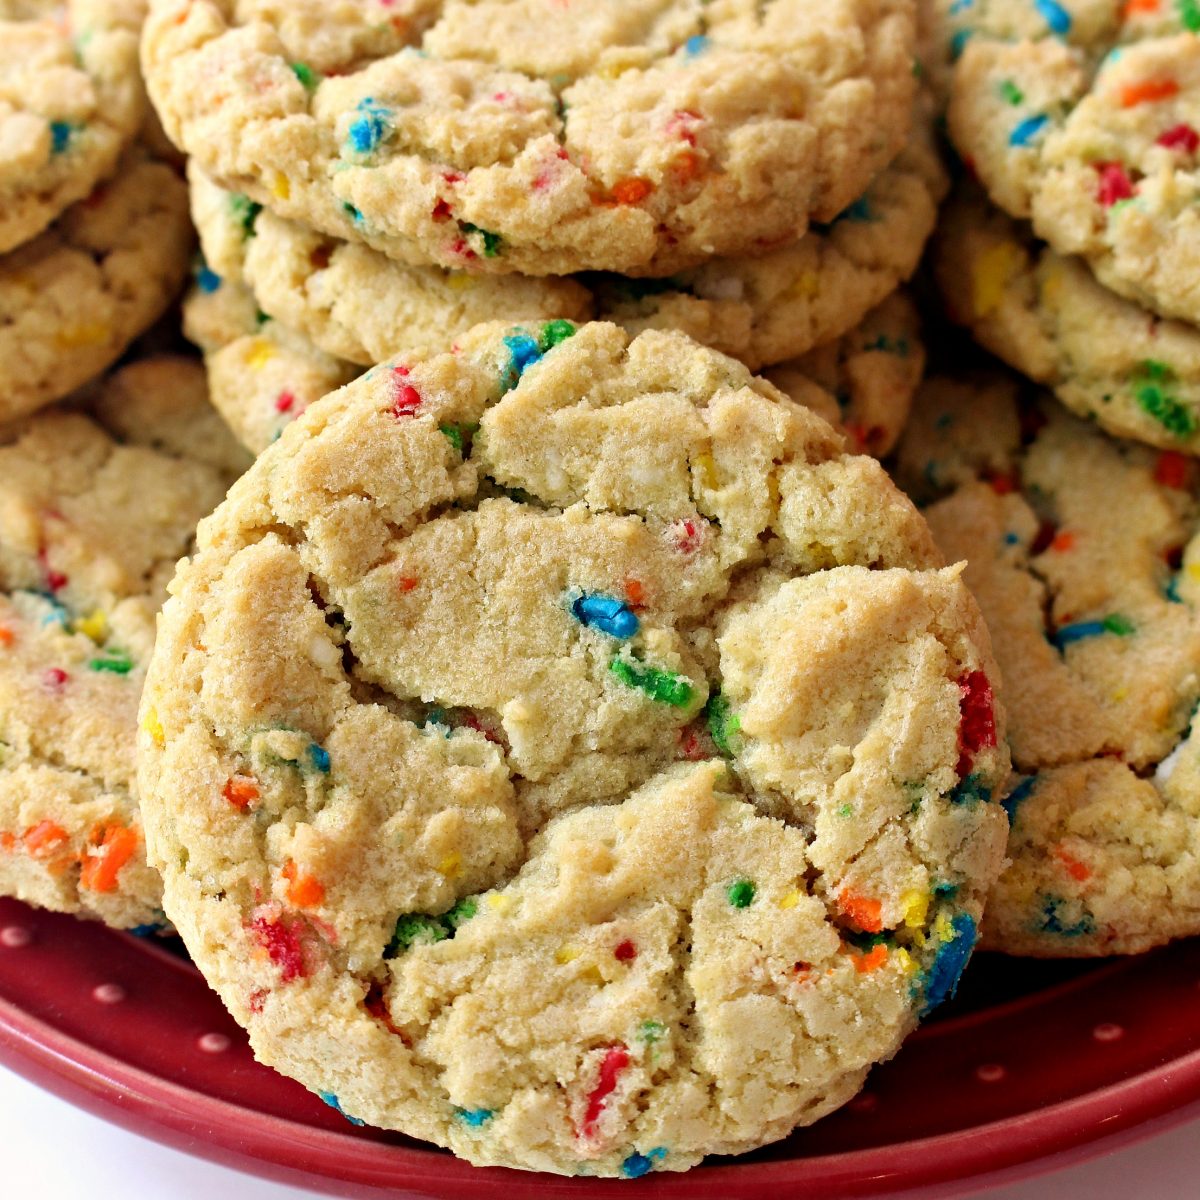 Cookie closeup showing crackled top and bright colored sprinkles.